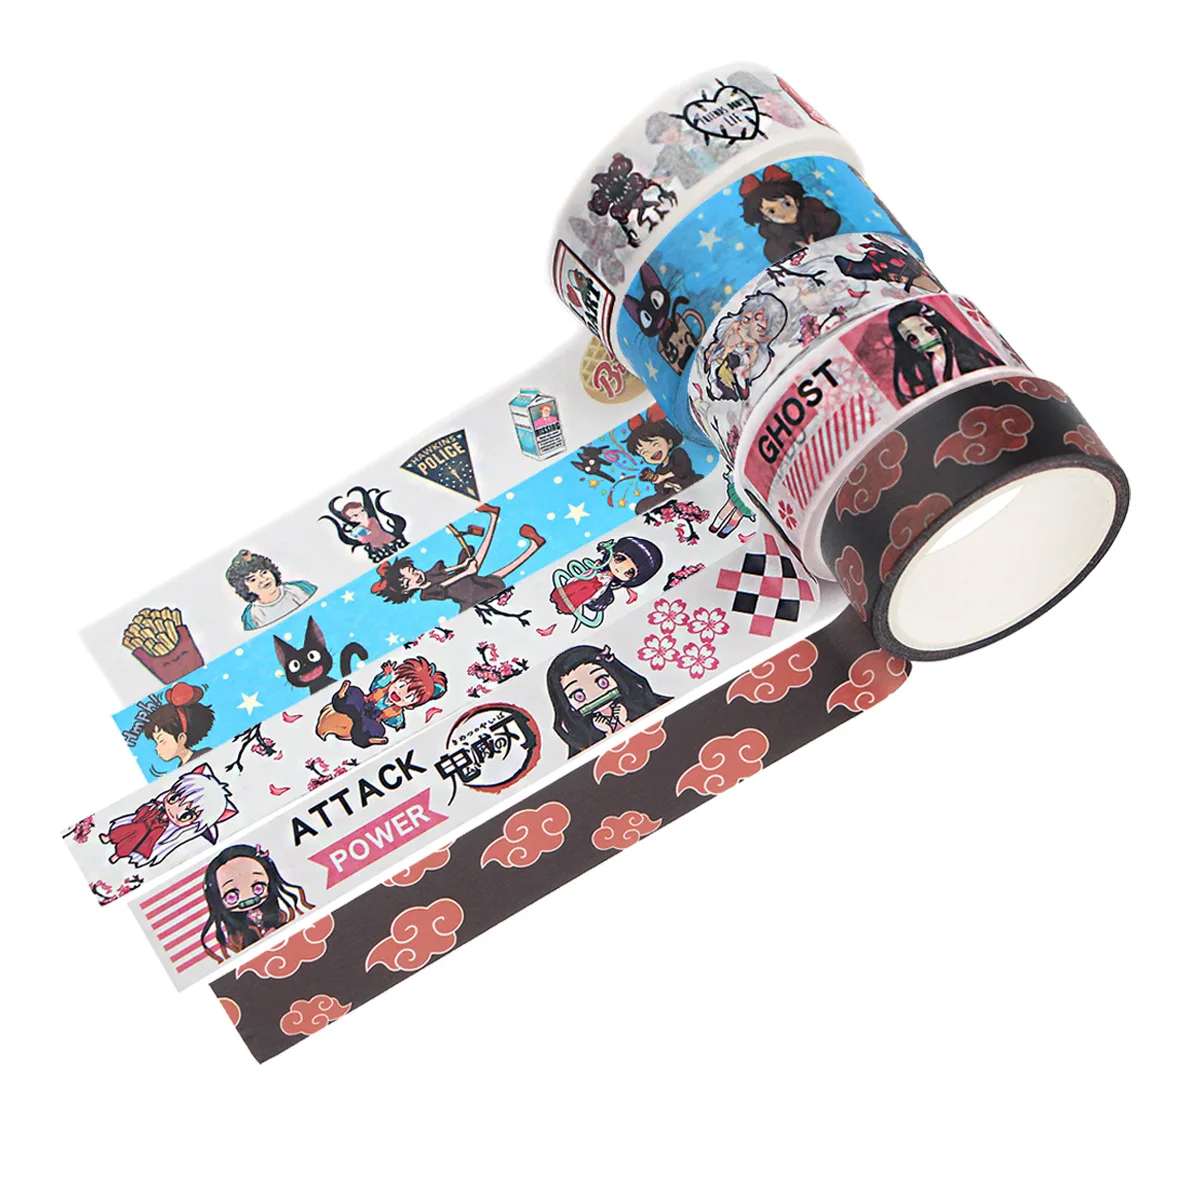 1pcs Cool Japanese Anime Cartoon Washi Tape DIY Scrapbooking Label Tape Student Stationery Gift Diary Tape School Office Supply